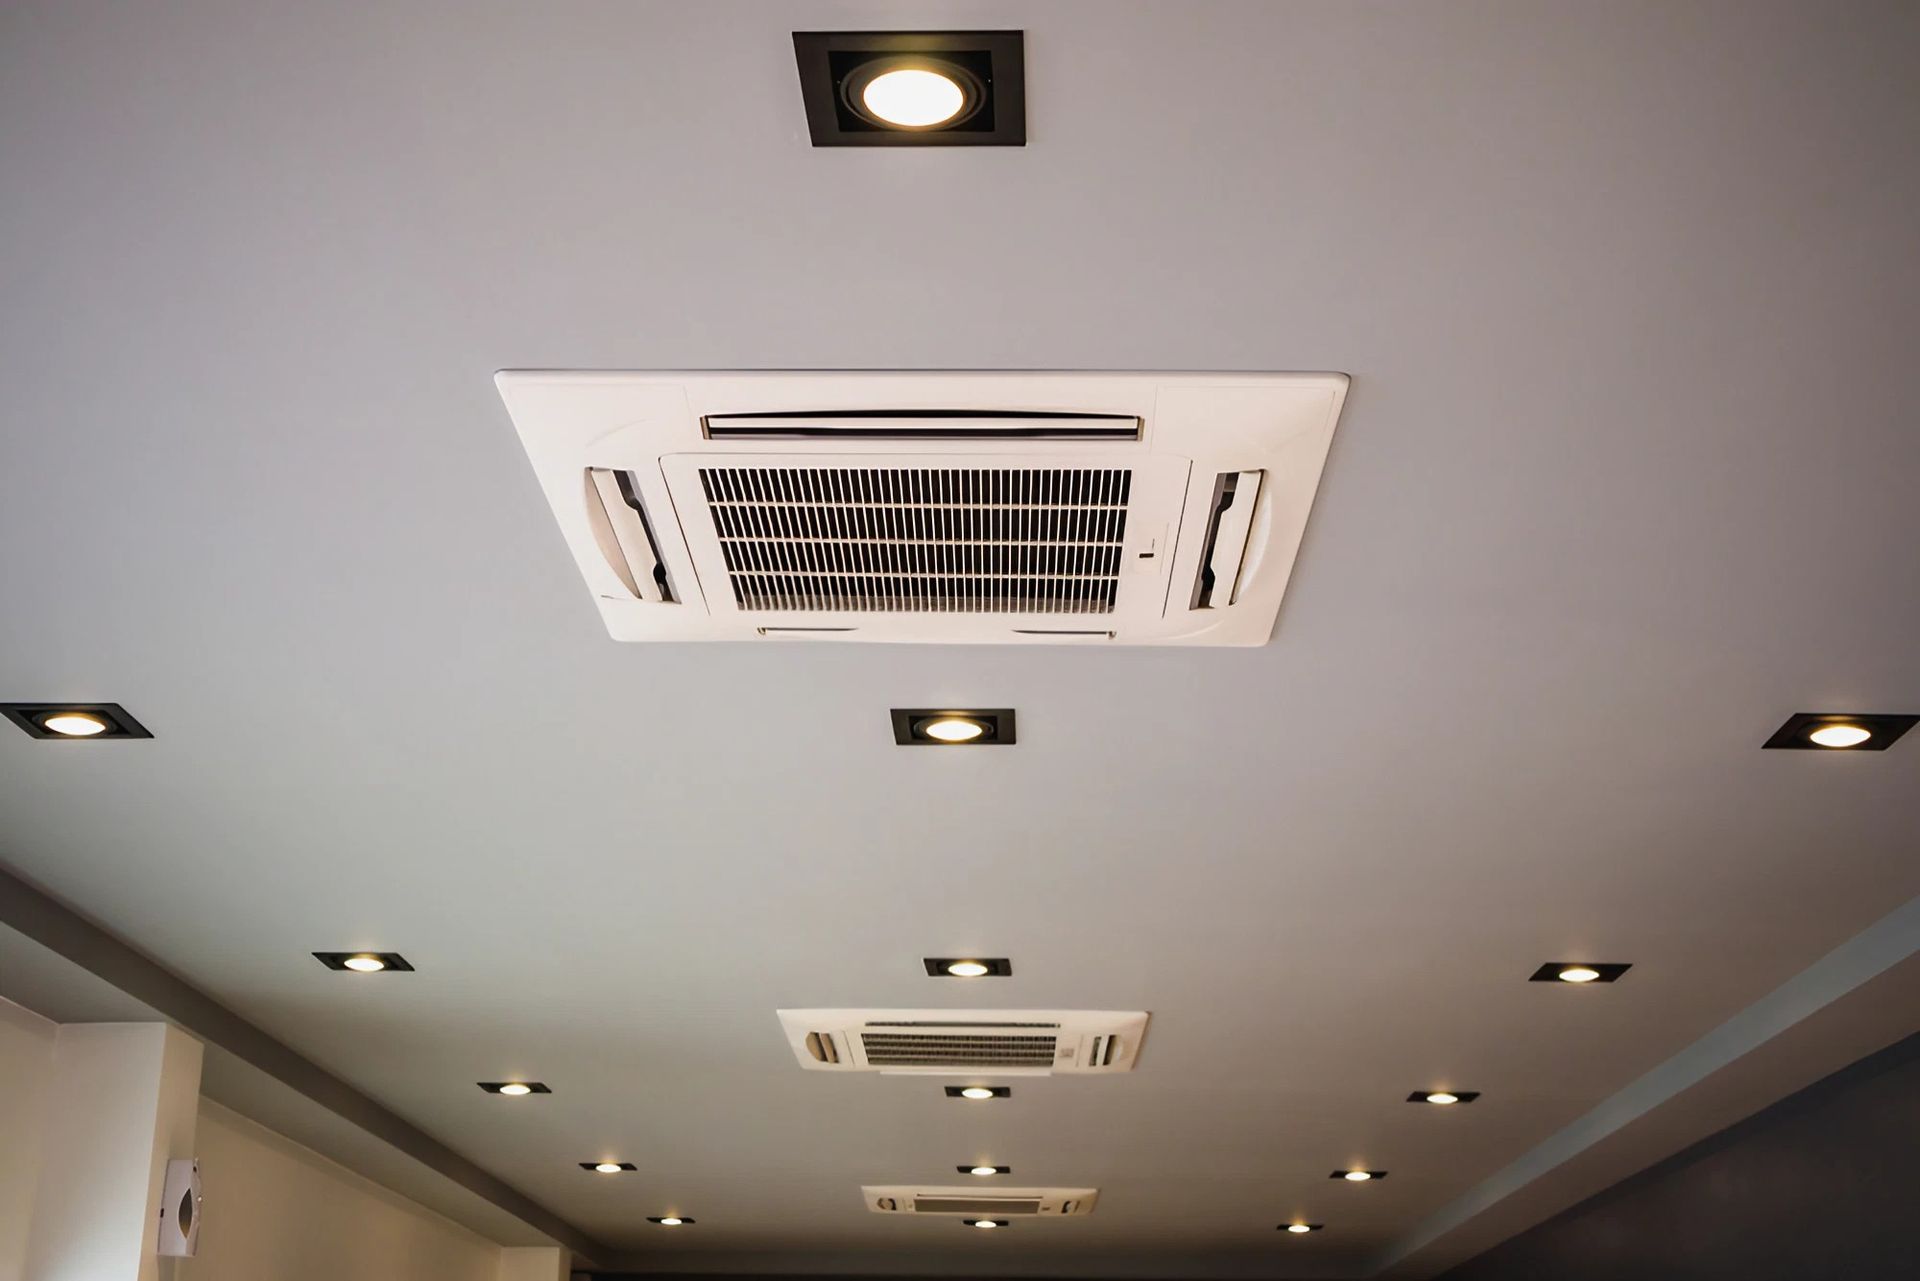 Central Air-conditioner Vent Installed On The Ceiling  — North West Heating, Cooling and Refrigeration in Taminda, NSW